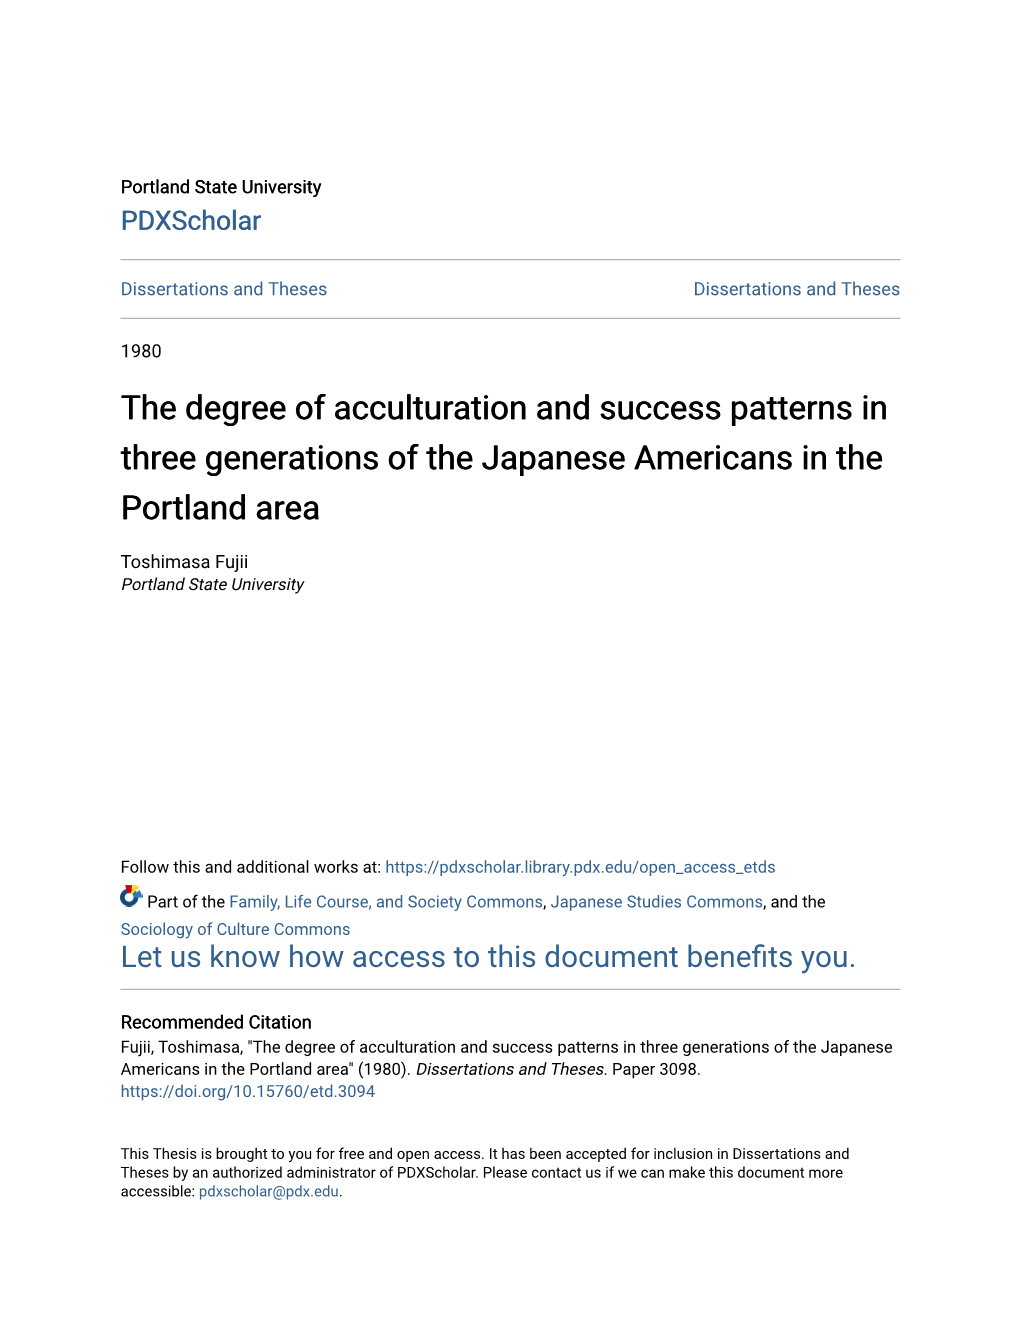 The Degree of Acculturation and Success Patterns in Three Generations of the Japanese Americans in the Portland Area